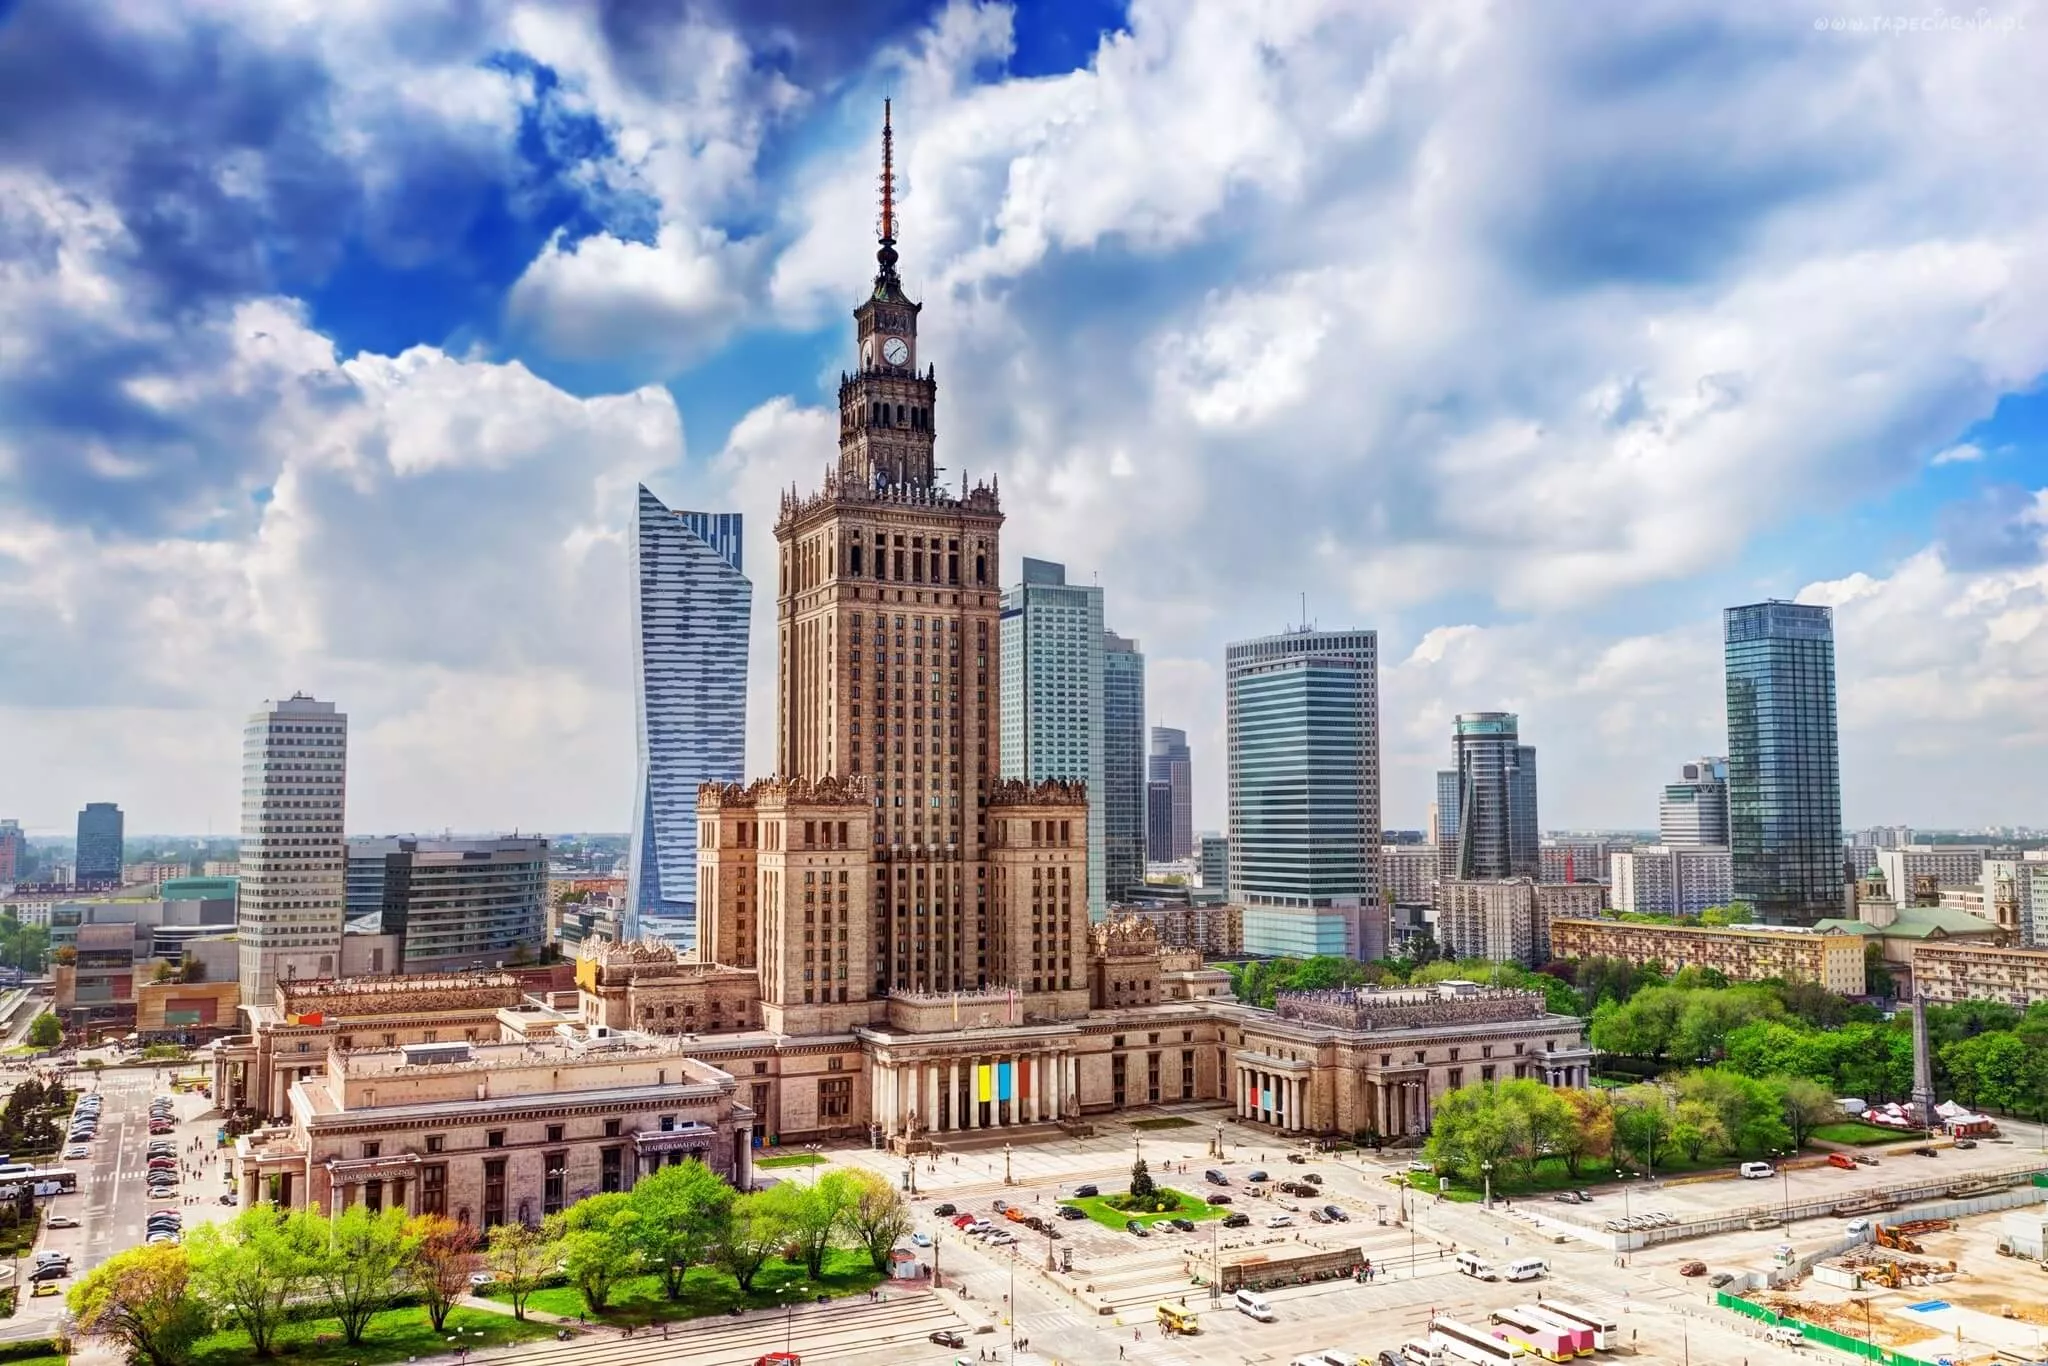 Palace of Culture and Science in Poland, Europe | Architecture - Rated 4.7